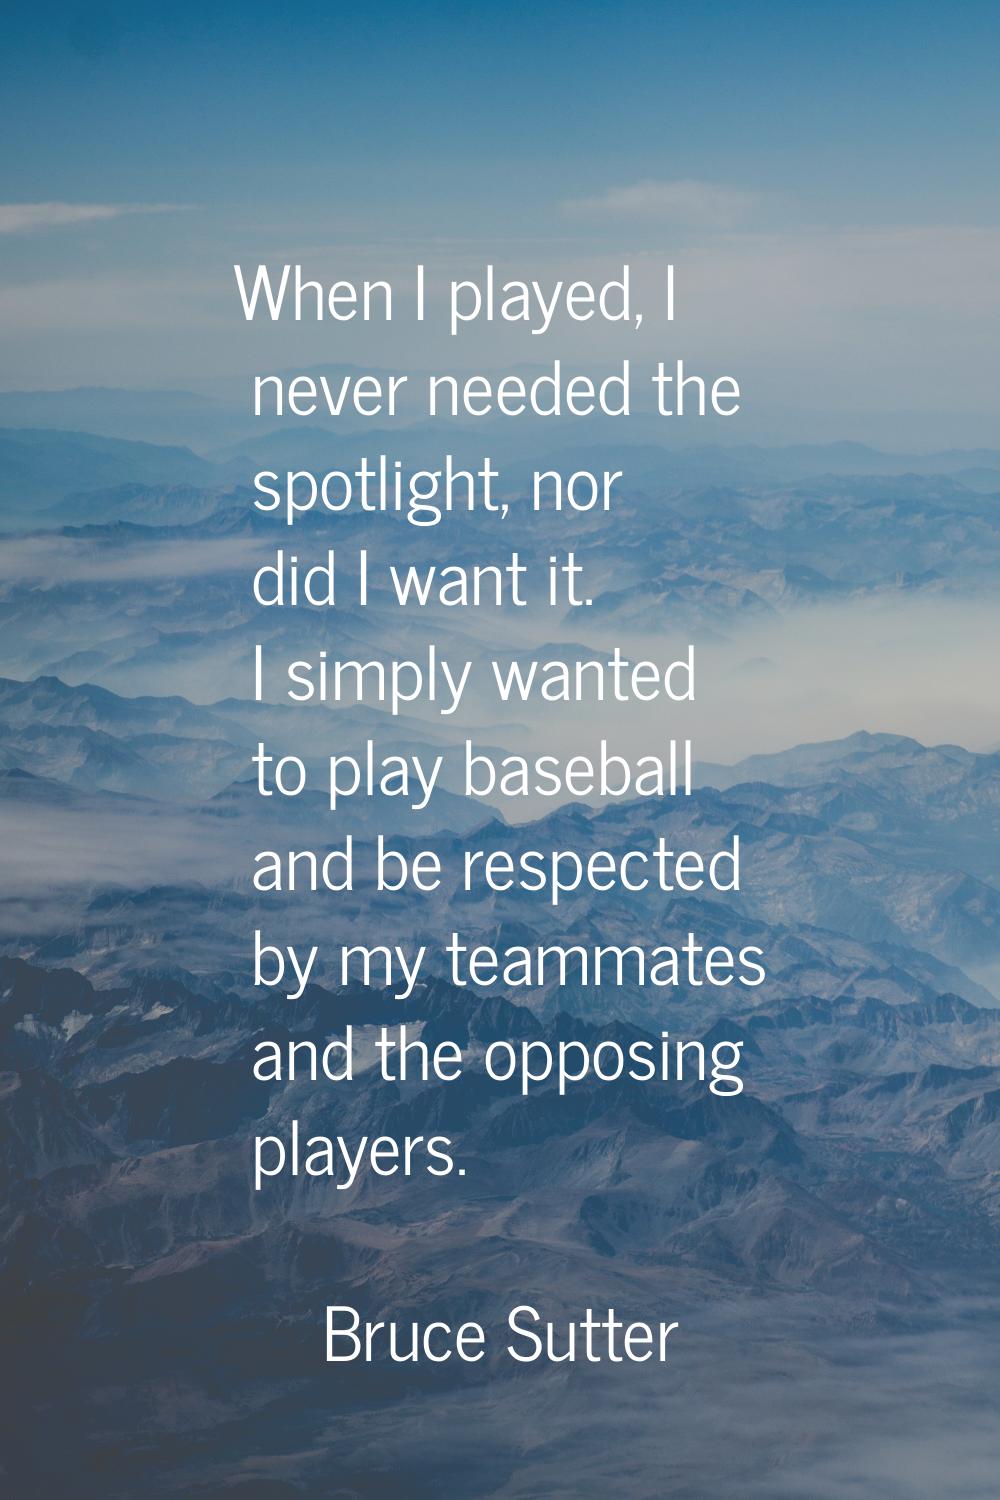 When I played, I never needed the spotlight, nor did I want it. I simply wanted to play baseball an